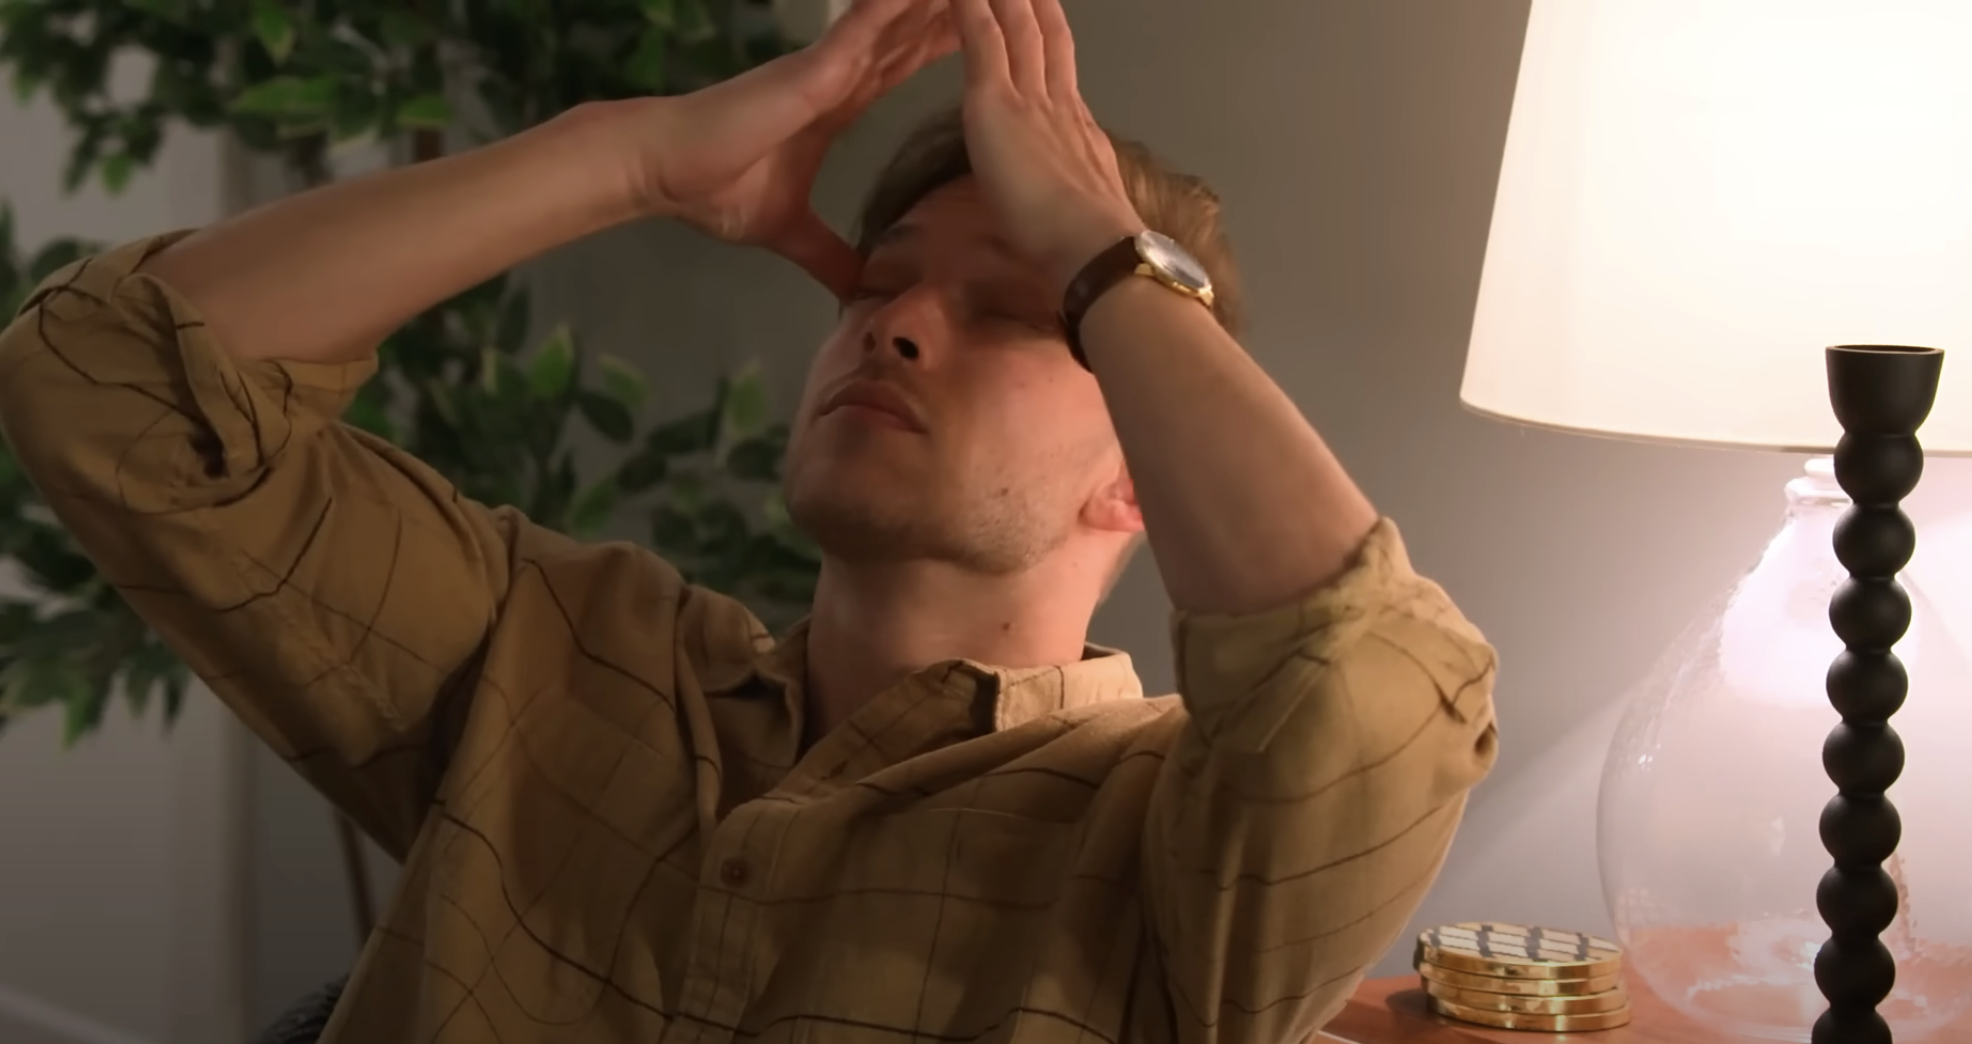 Man in checkered shirt with hands on head, eyes closed, expressing frustration or fatigue, indoors beside a lamp